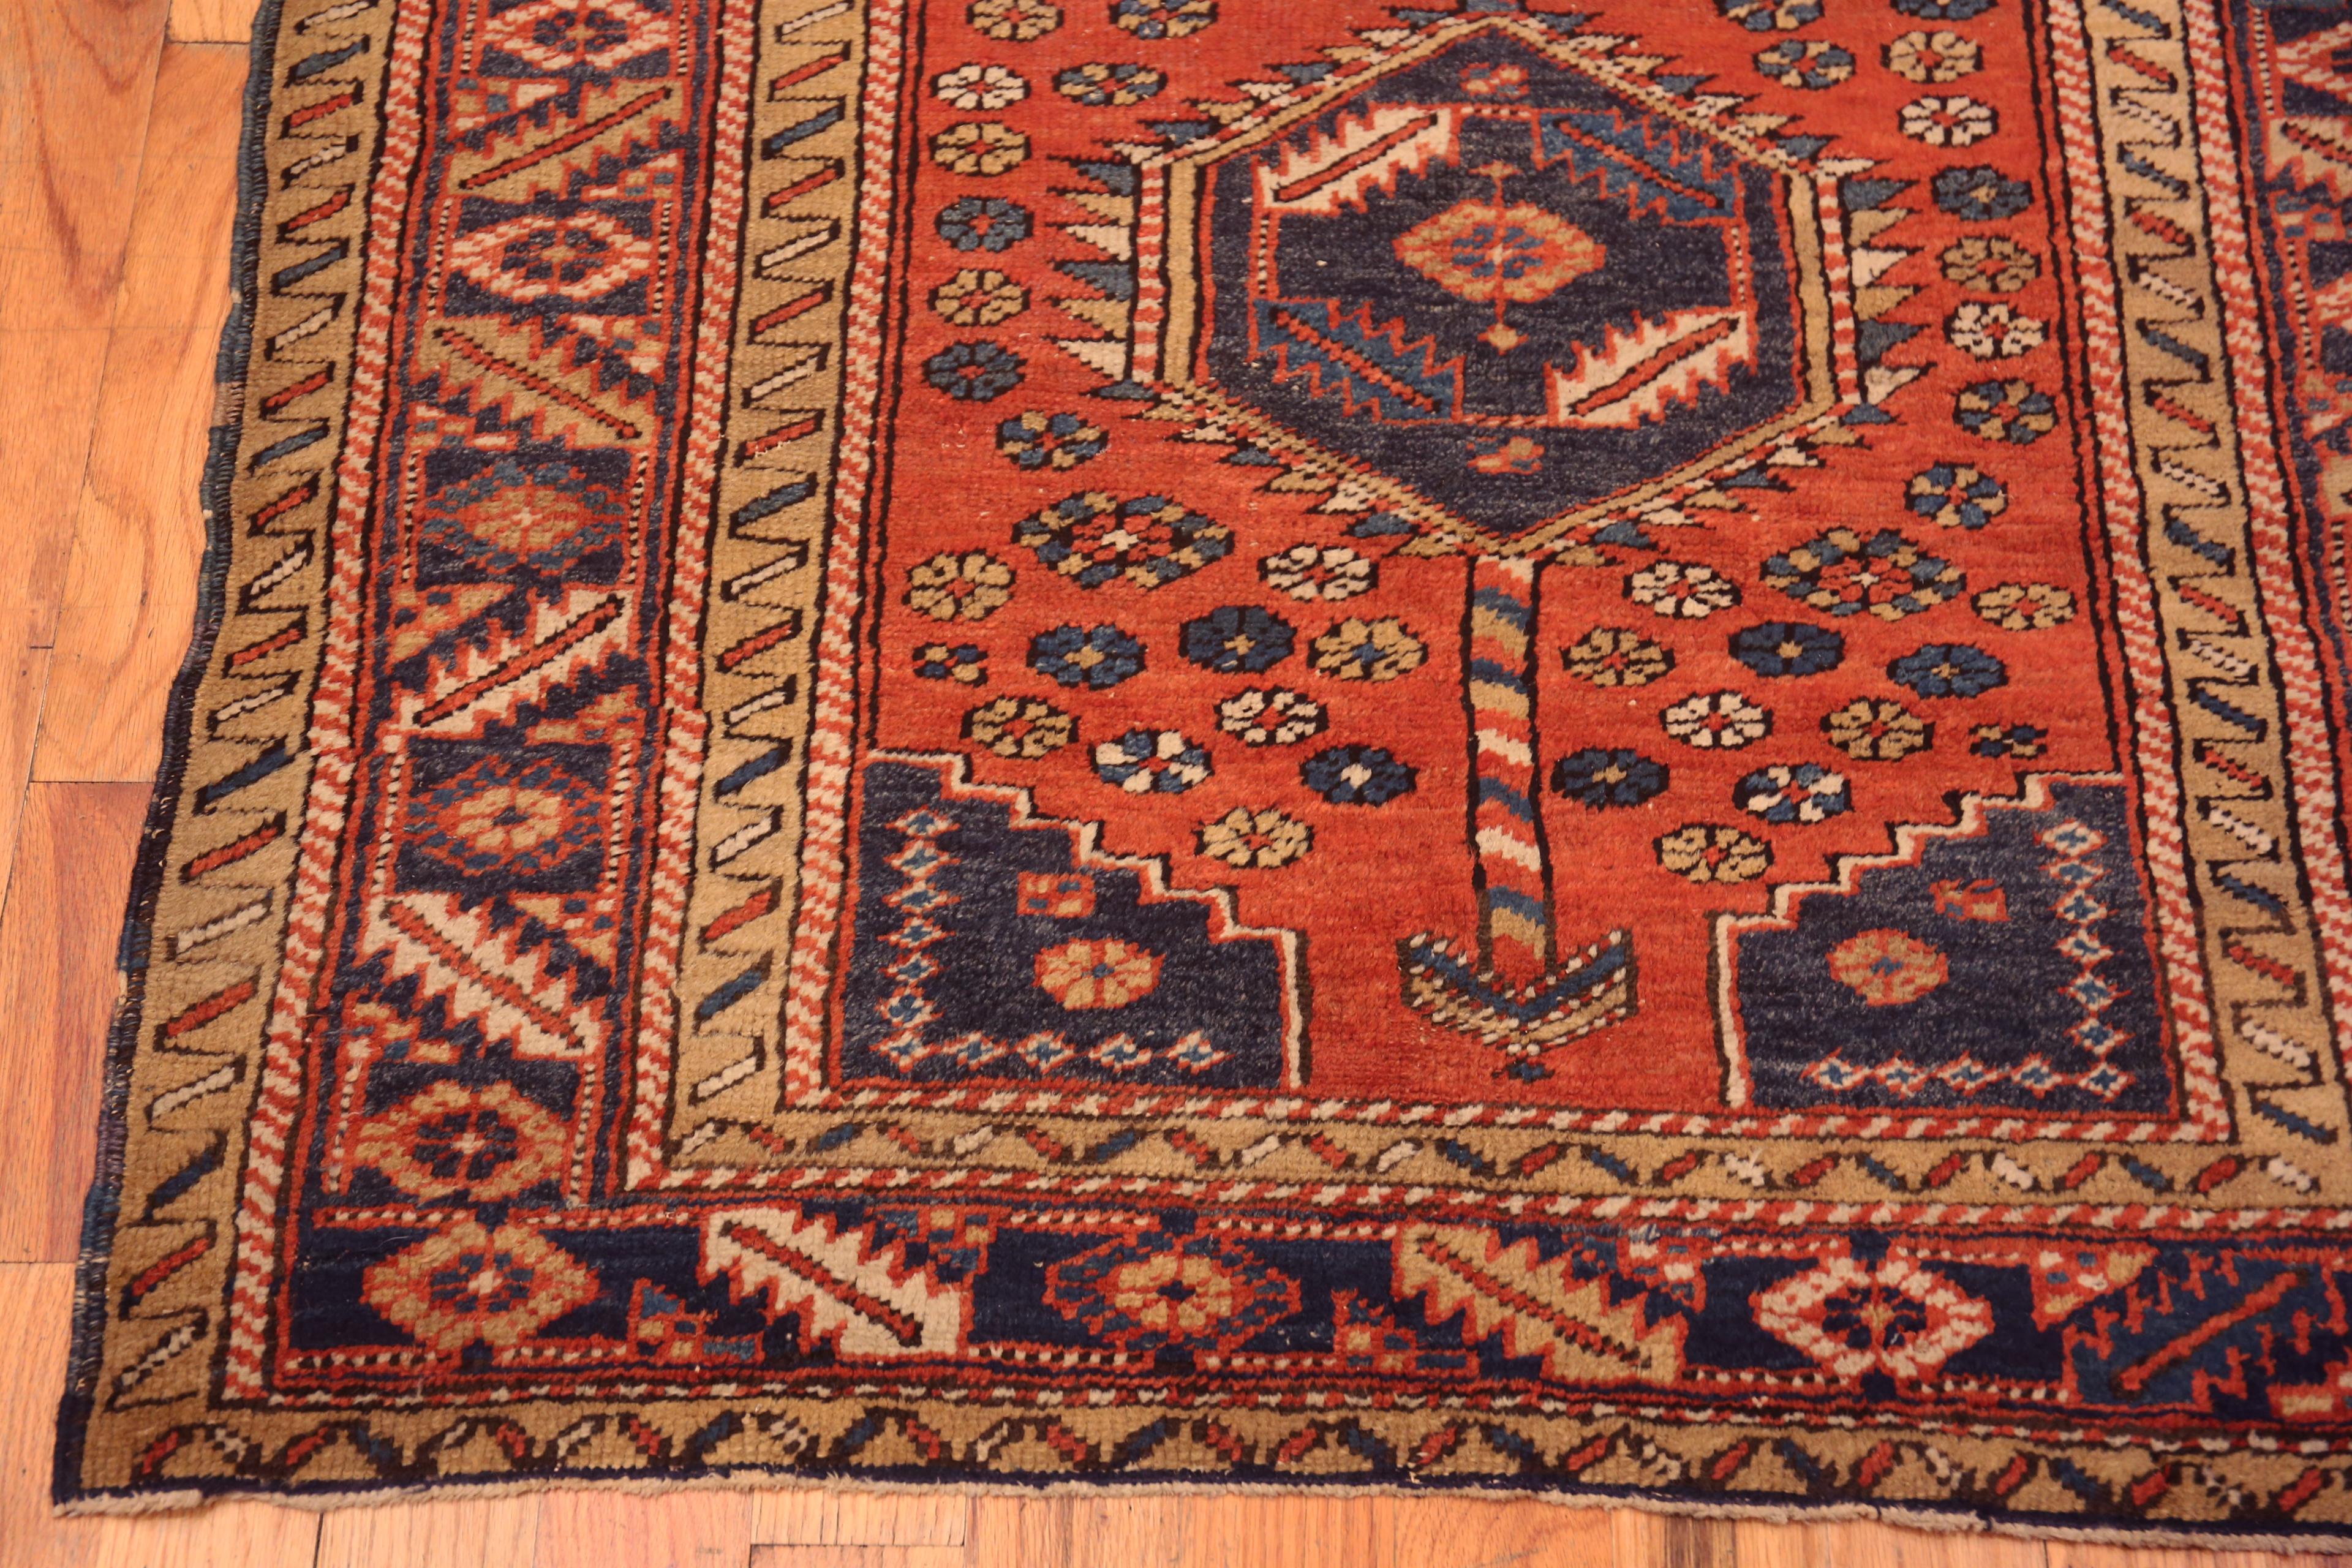 Hand-Knotted Beautiful Small Rustic Geometric Tribal Antique Persian Heriz Rug 3'10